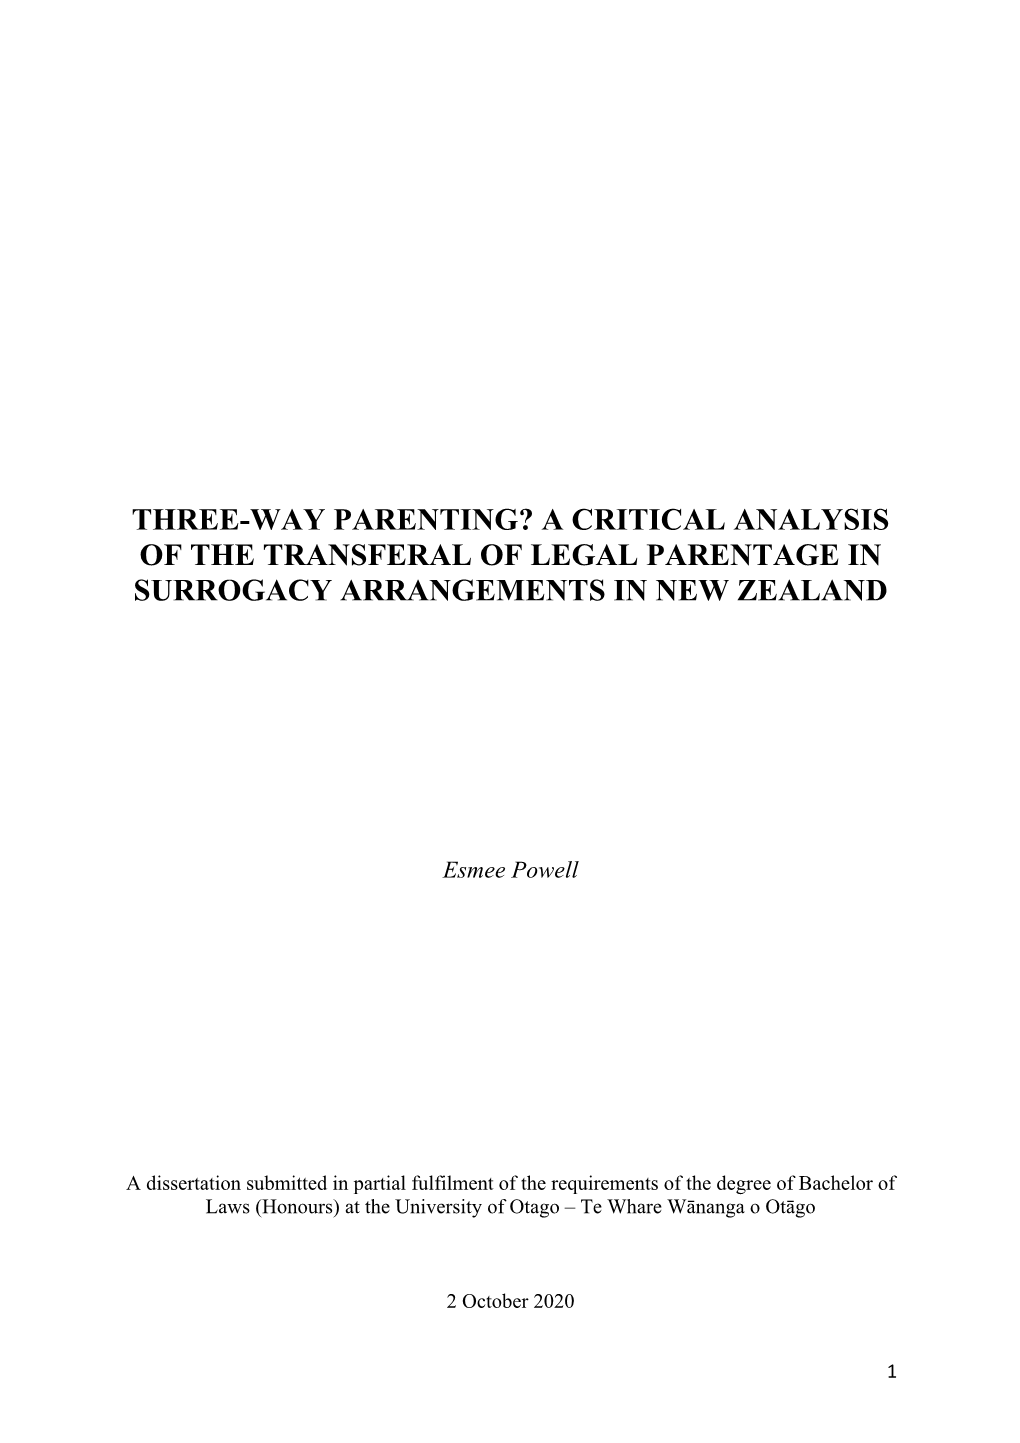 A Critical Analysis of the Transferral of Legal